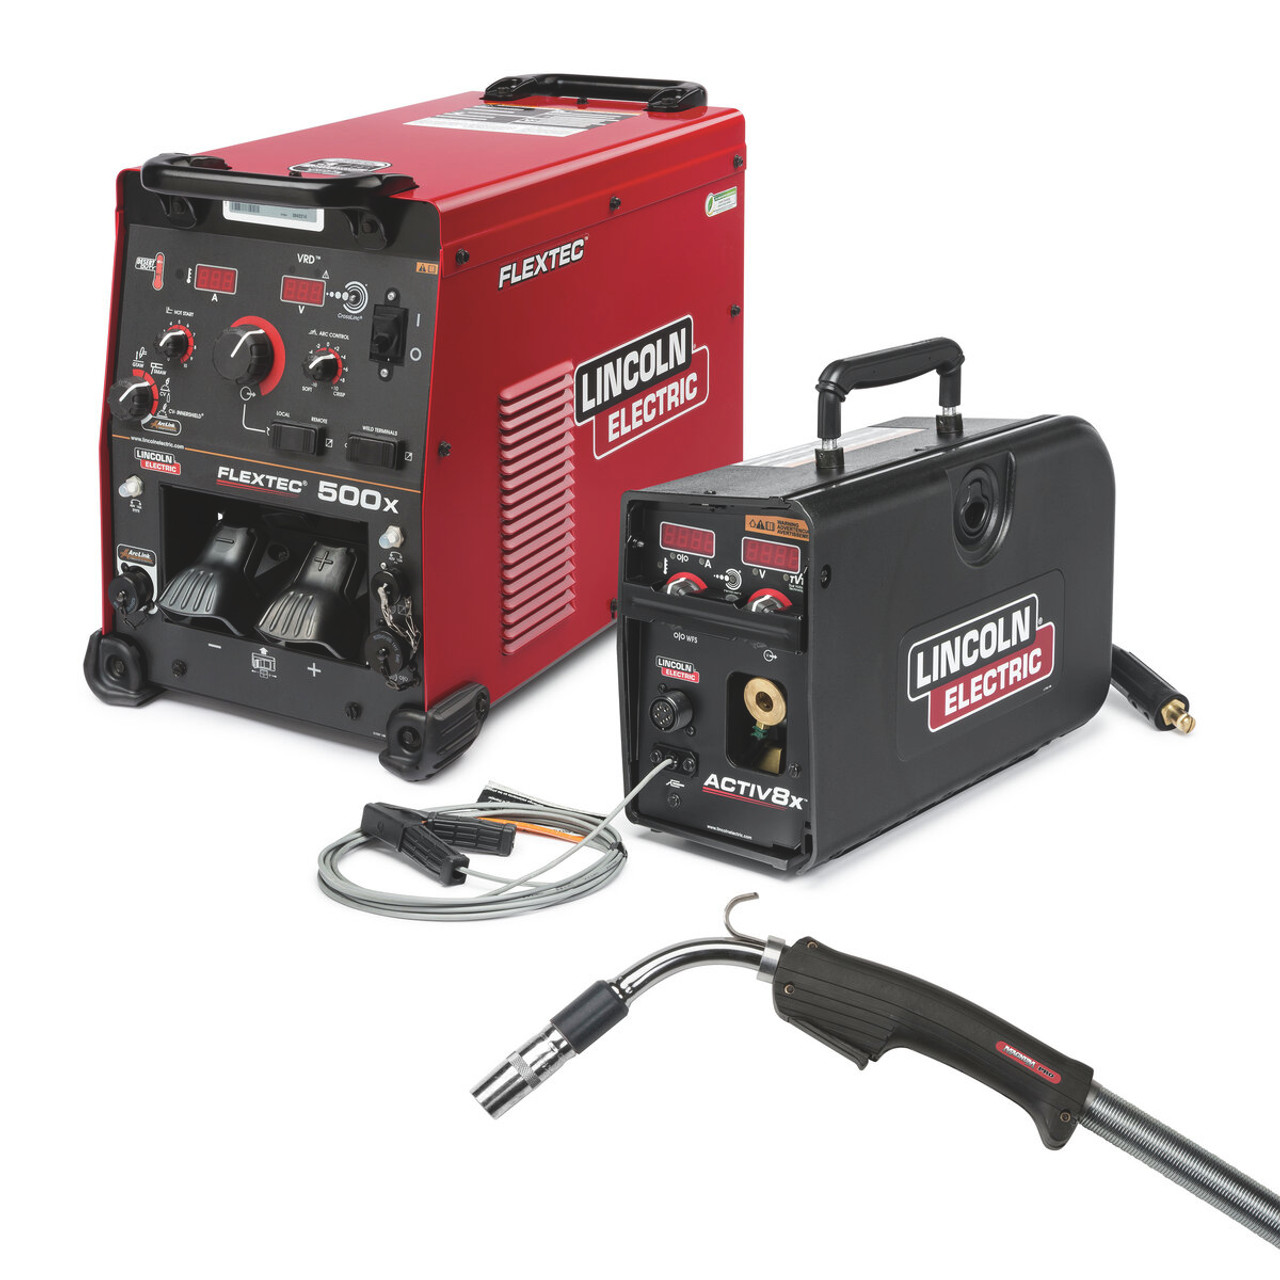 5) Lincoln Electric 650X Welders and (1) Lincoln Electric Flex